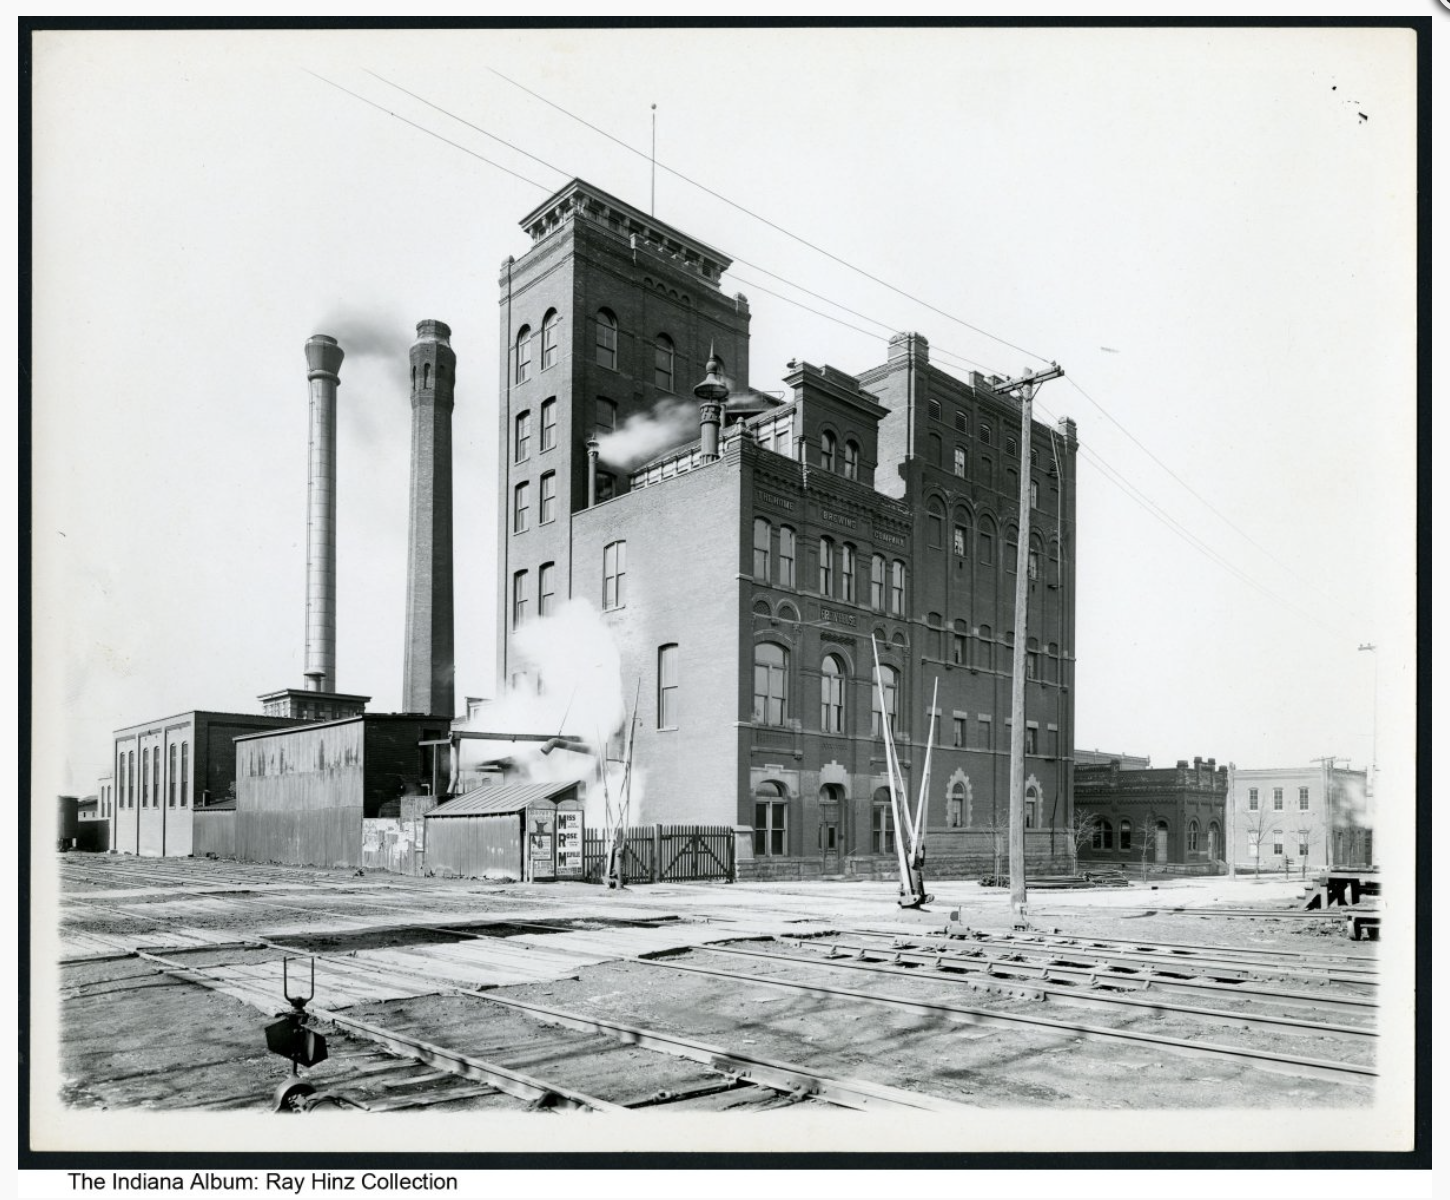 A large, multi-level, brick, industrial collection of attached building with two tall smokestacks is shown. There are railroad tracks in front.